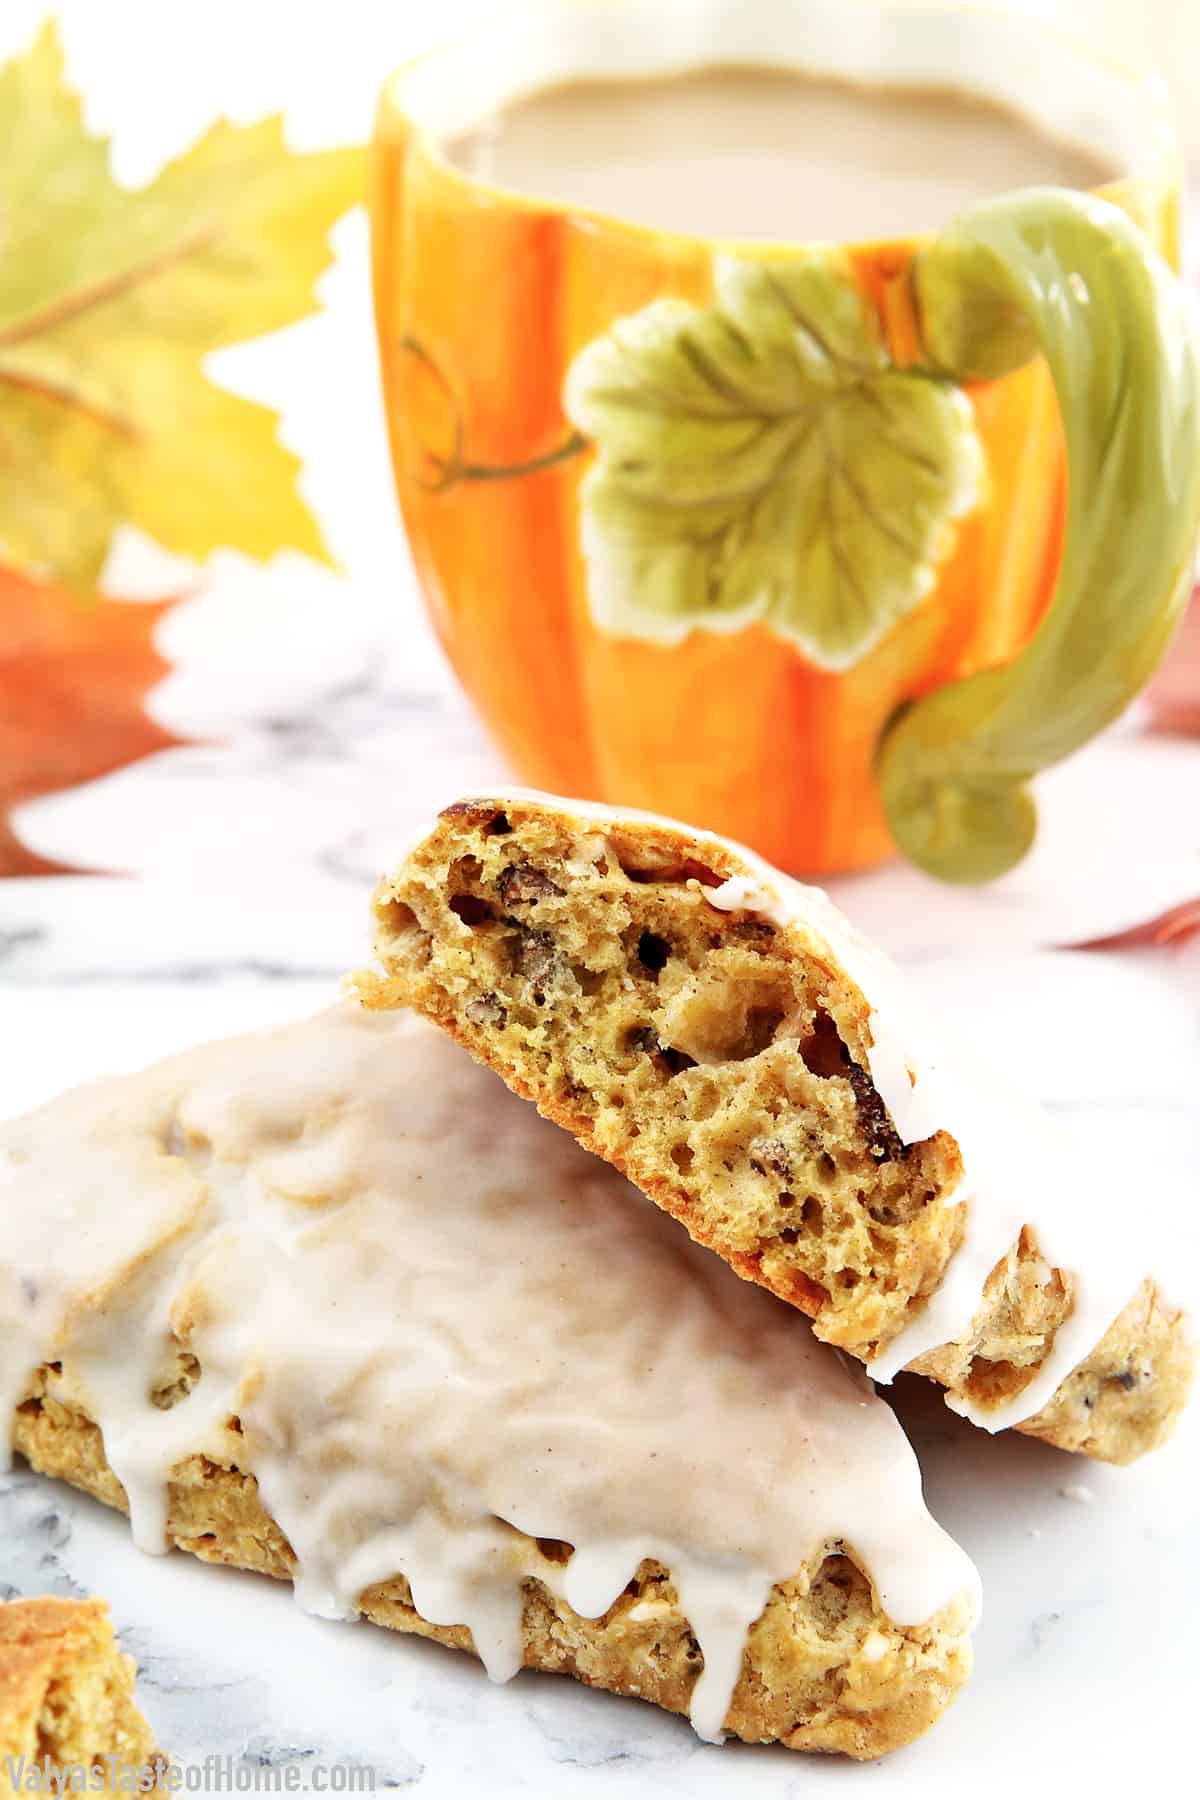 Pumpkin scones are essentially delicious scones flavored with pumpkin puree for the tastiest fall treats ever! This is one of the best pumpkin recipes that works for just about any occasion! 